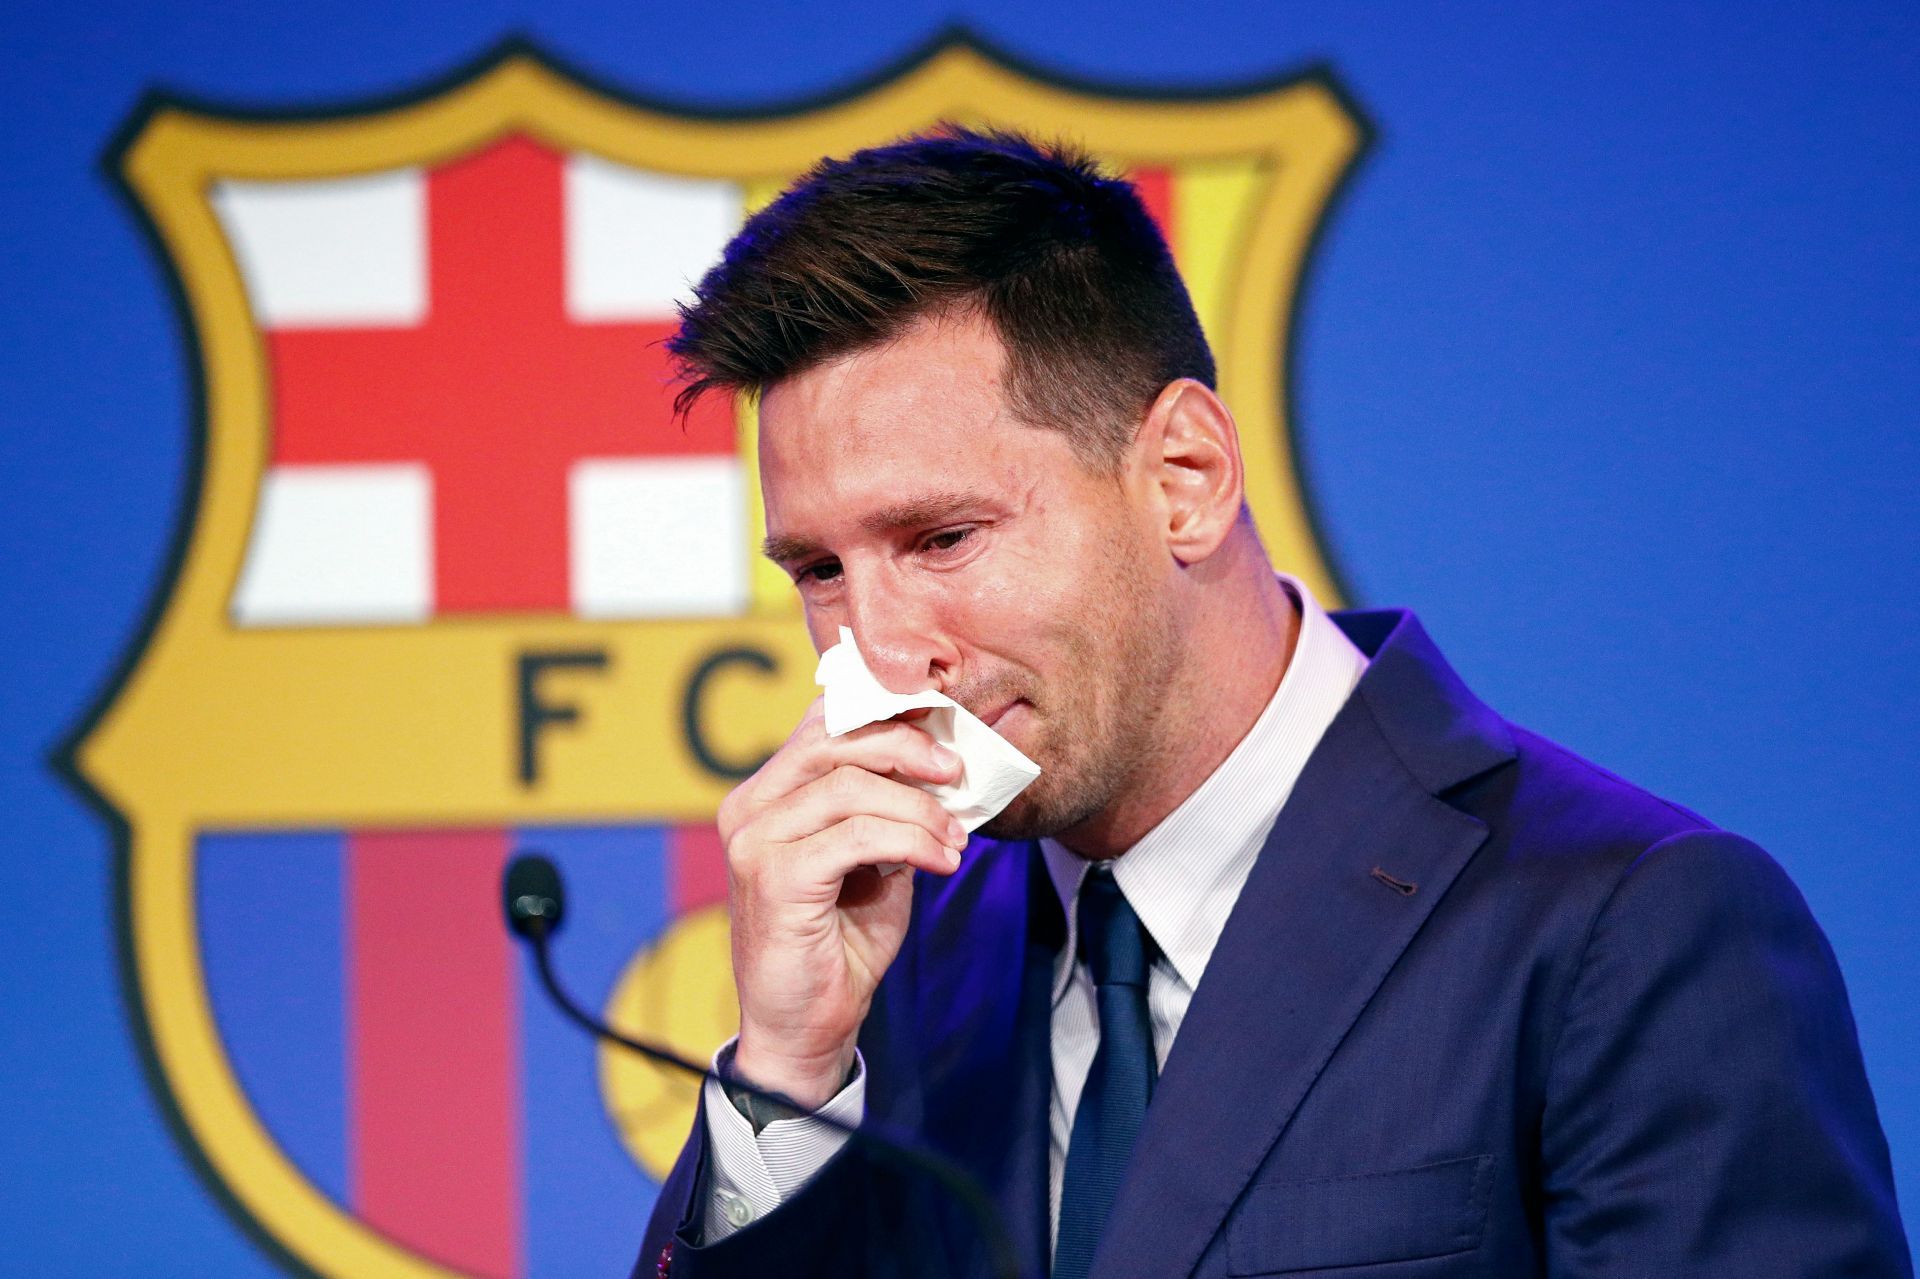 Lionel Messi made a sad departure from the Nou Camp